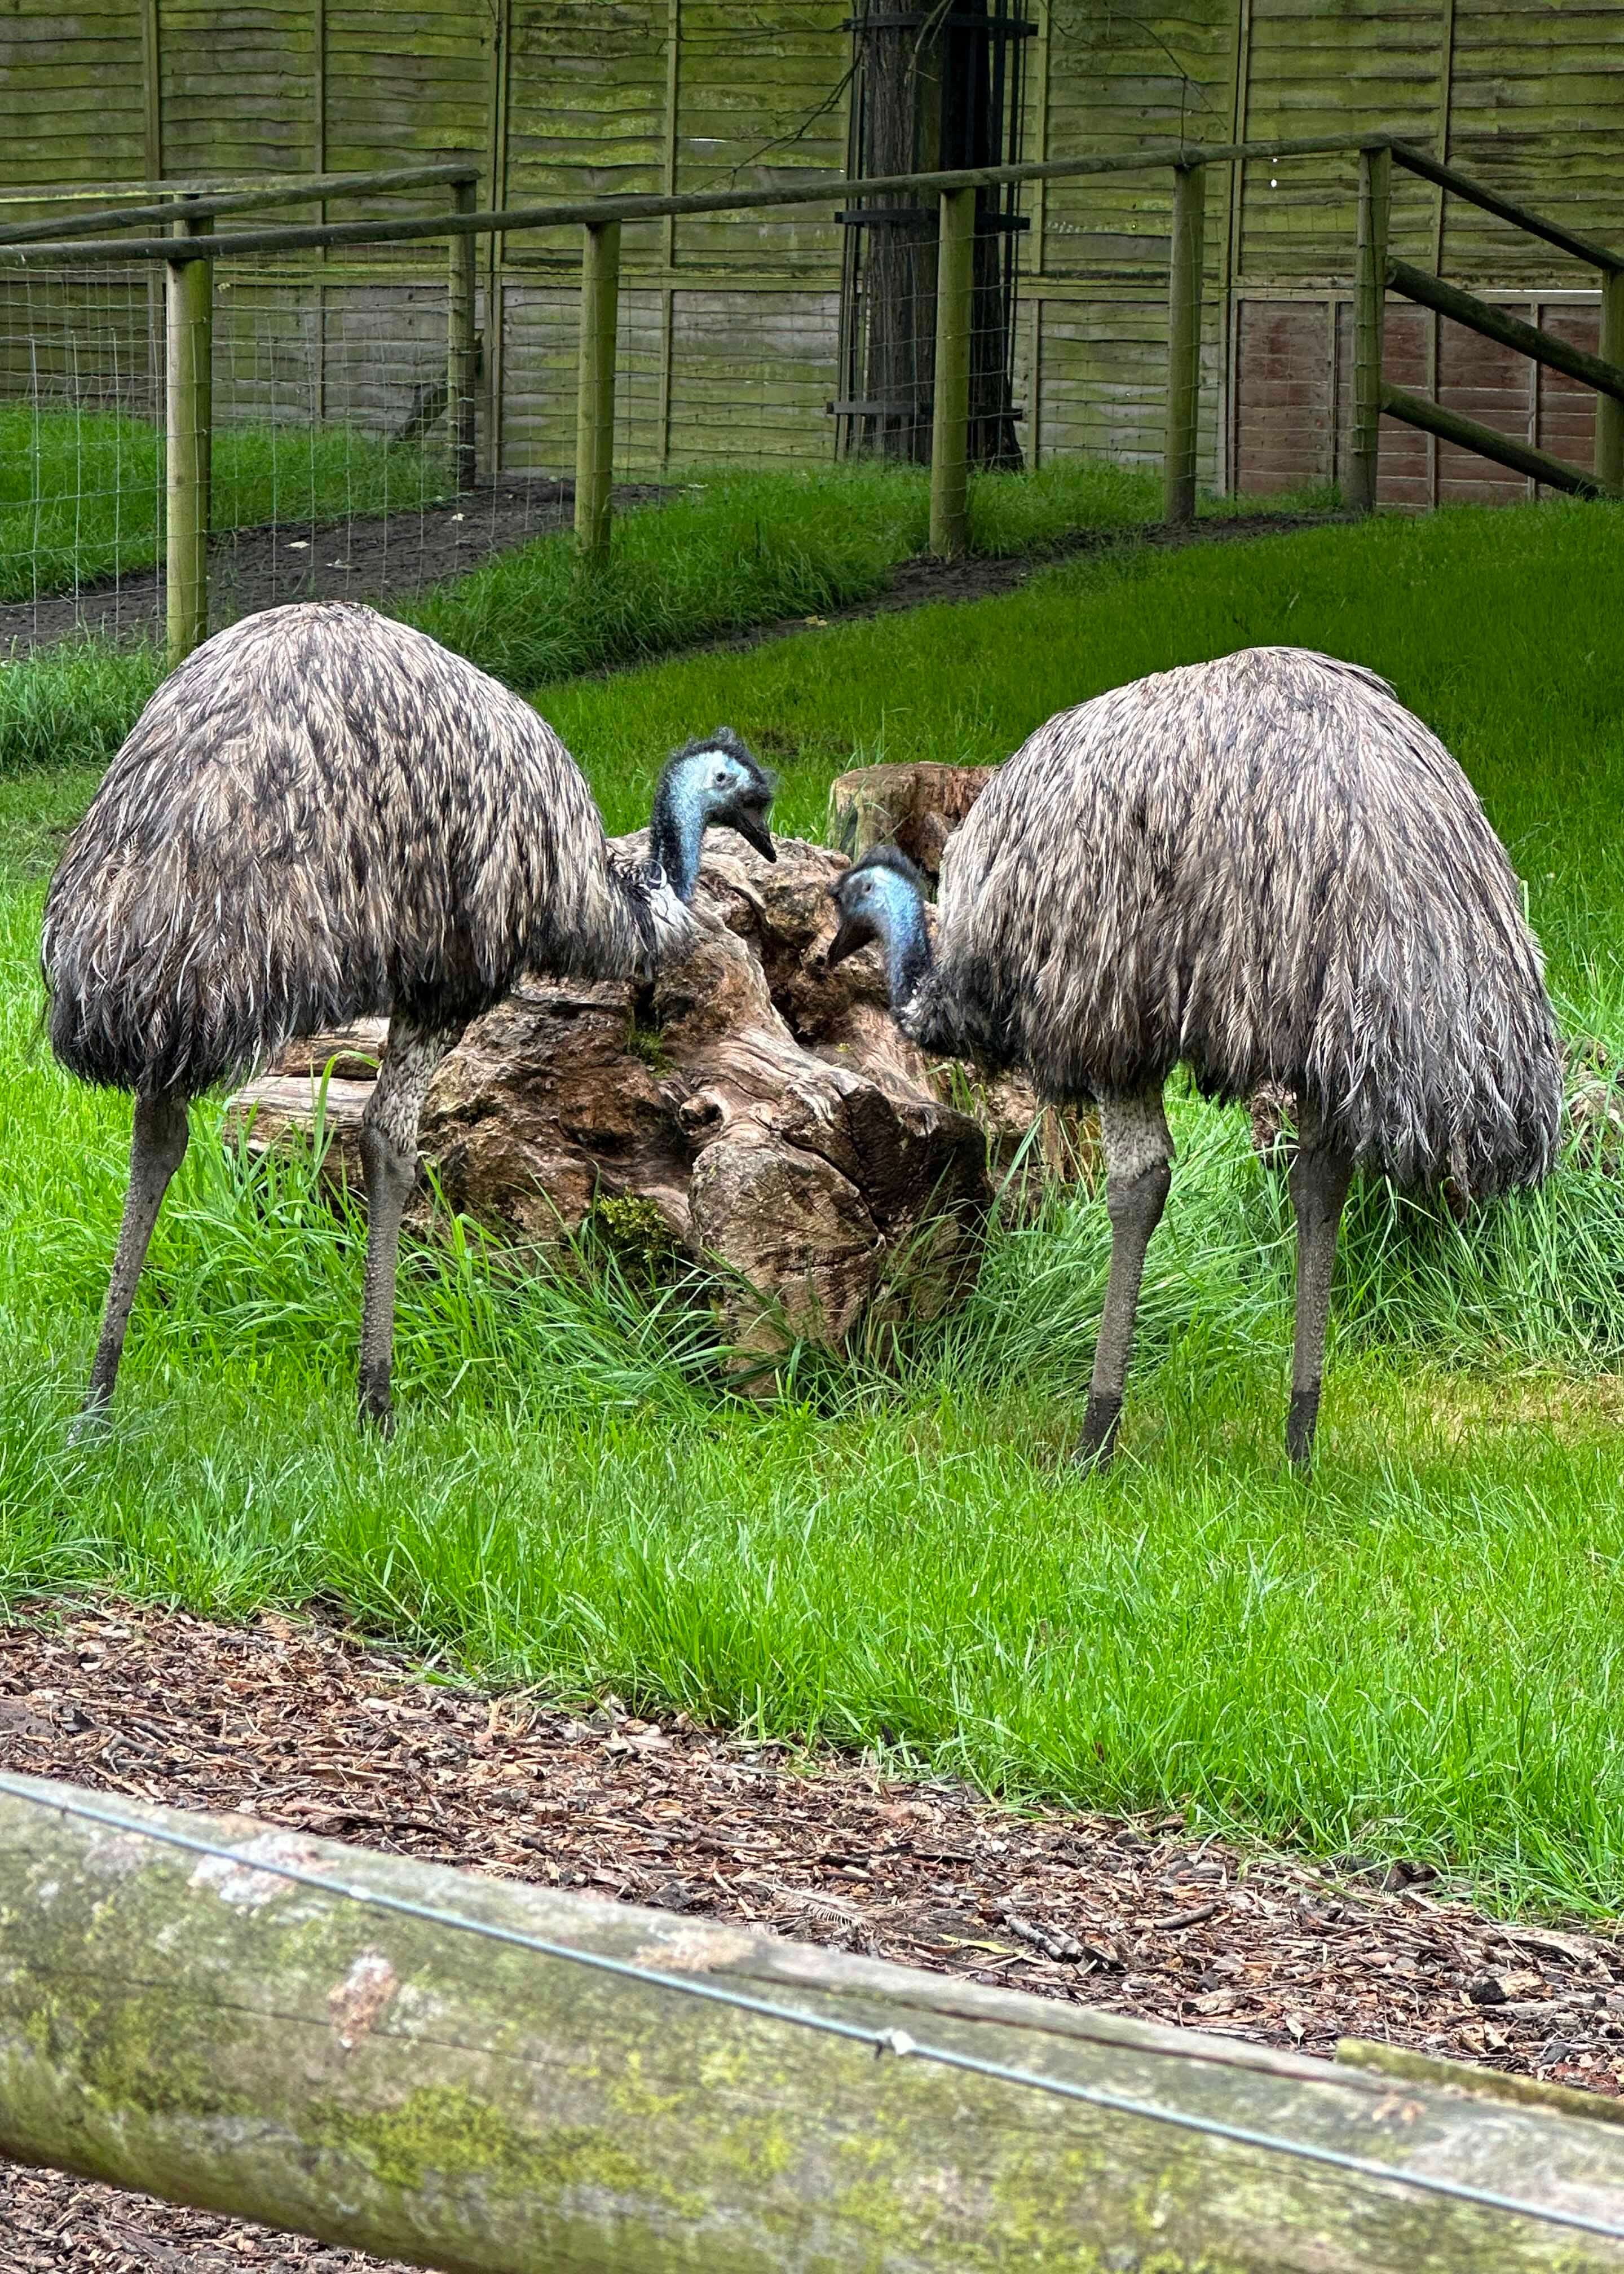 Birds at Battersea Park Zoo |  Ibstock Place School, a private school near Richmond, Barnes, Putney, Kingston, and Wandsworth on an overseas trip. 